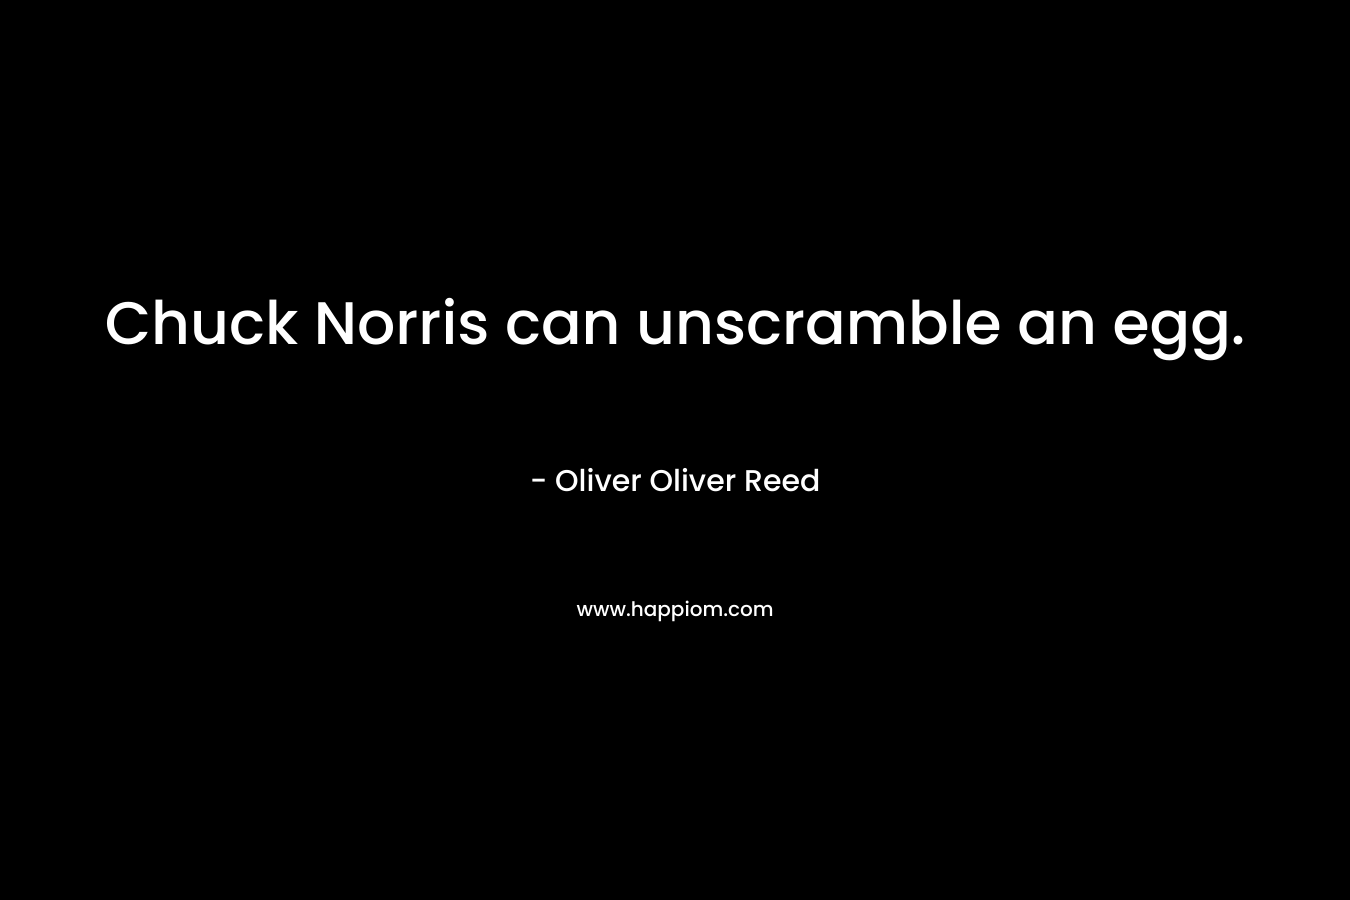 Chuck Norris can unscramble an egg. – Oliver Oliver Reed